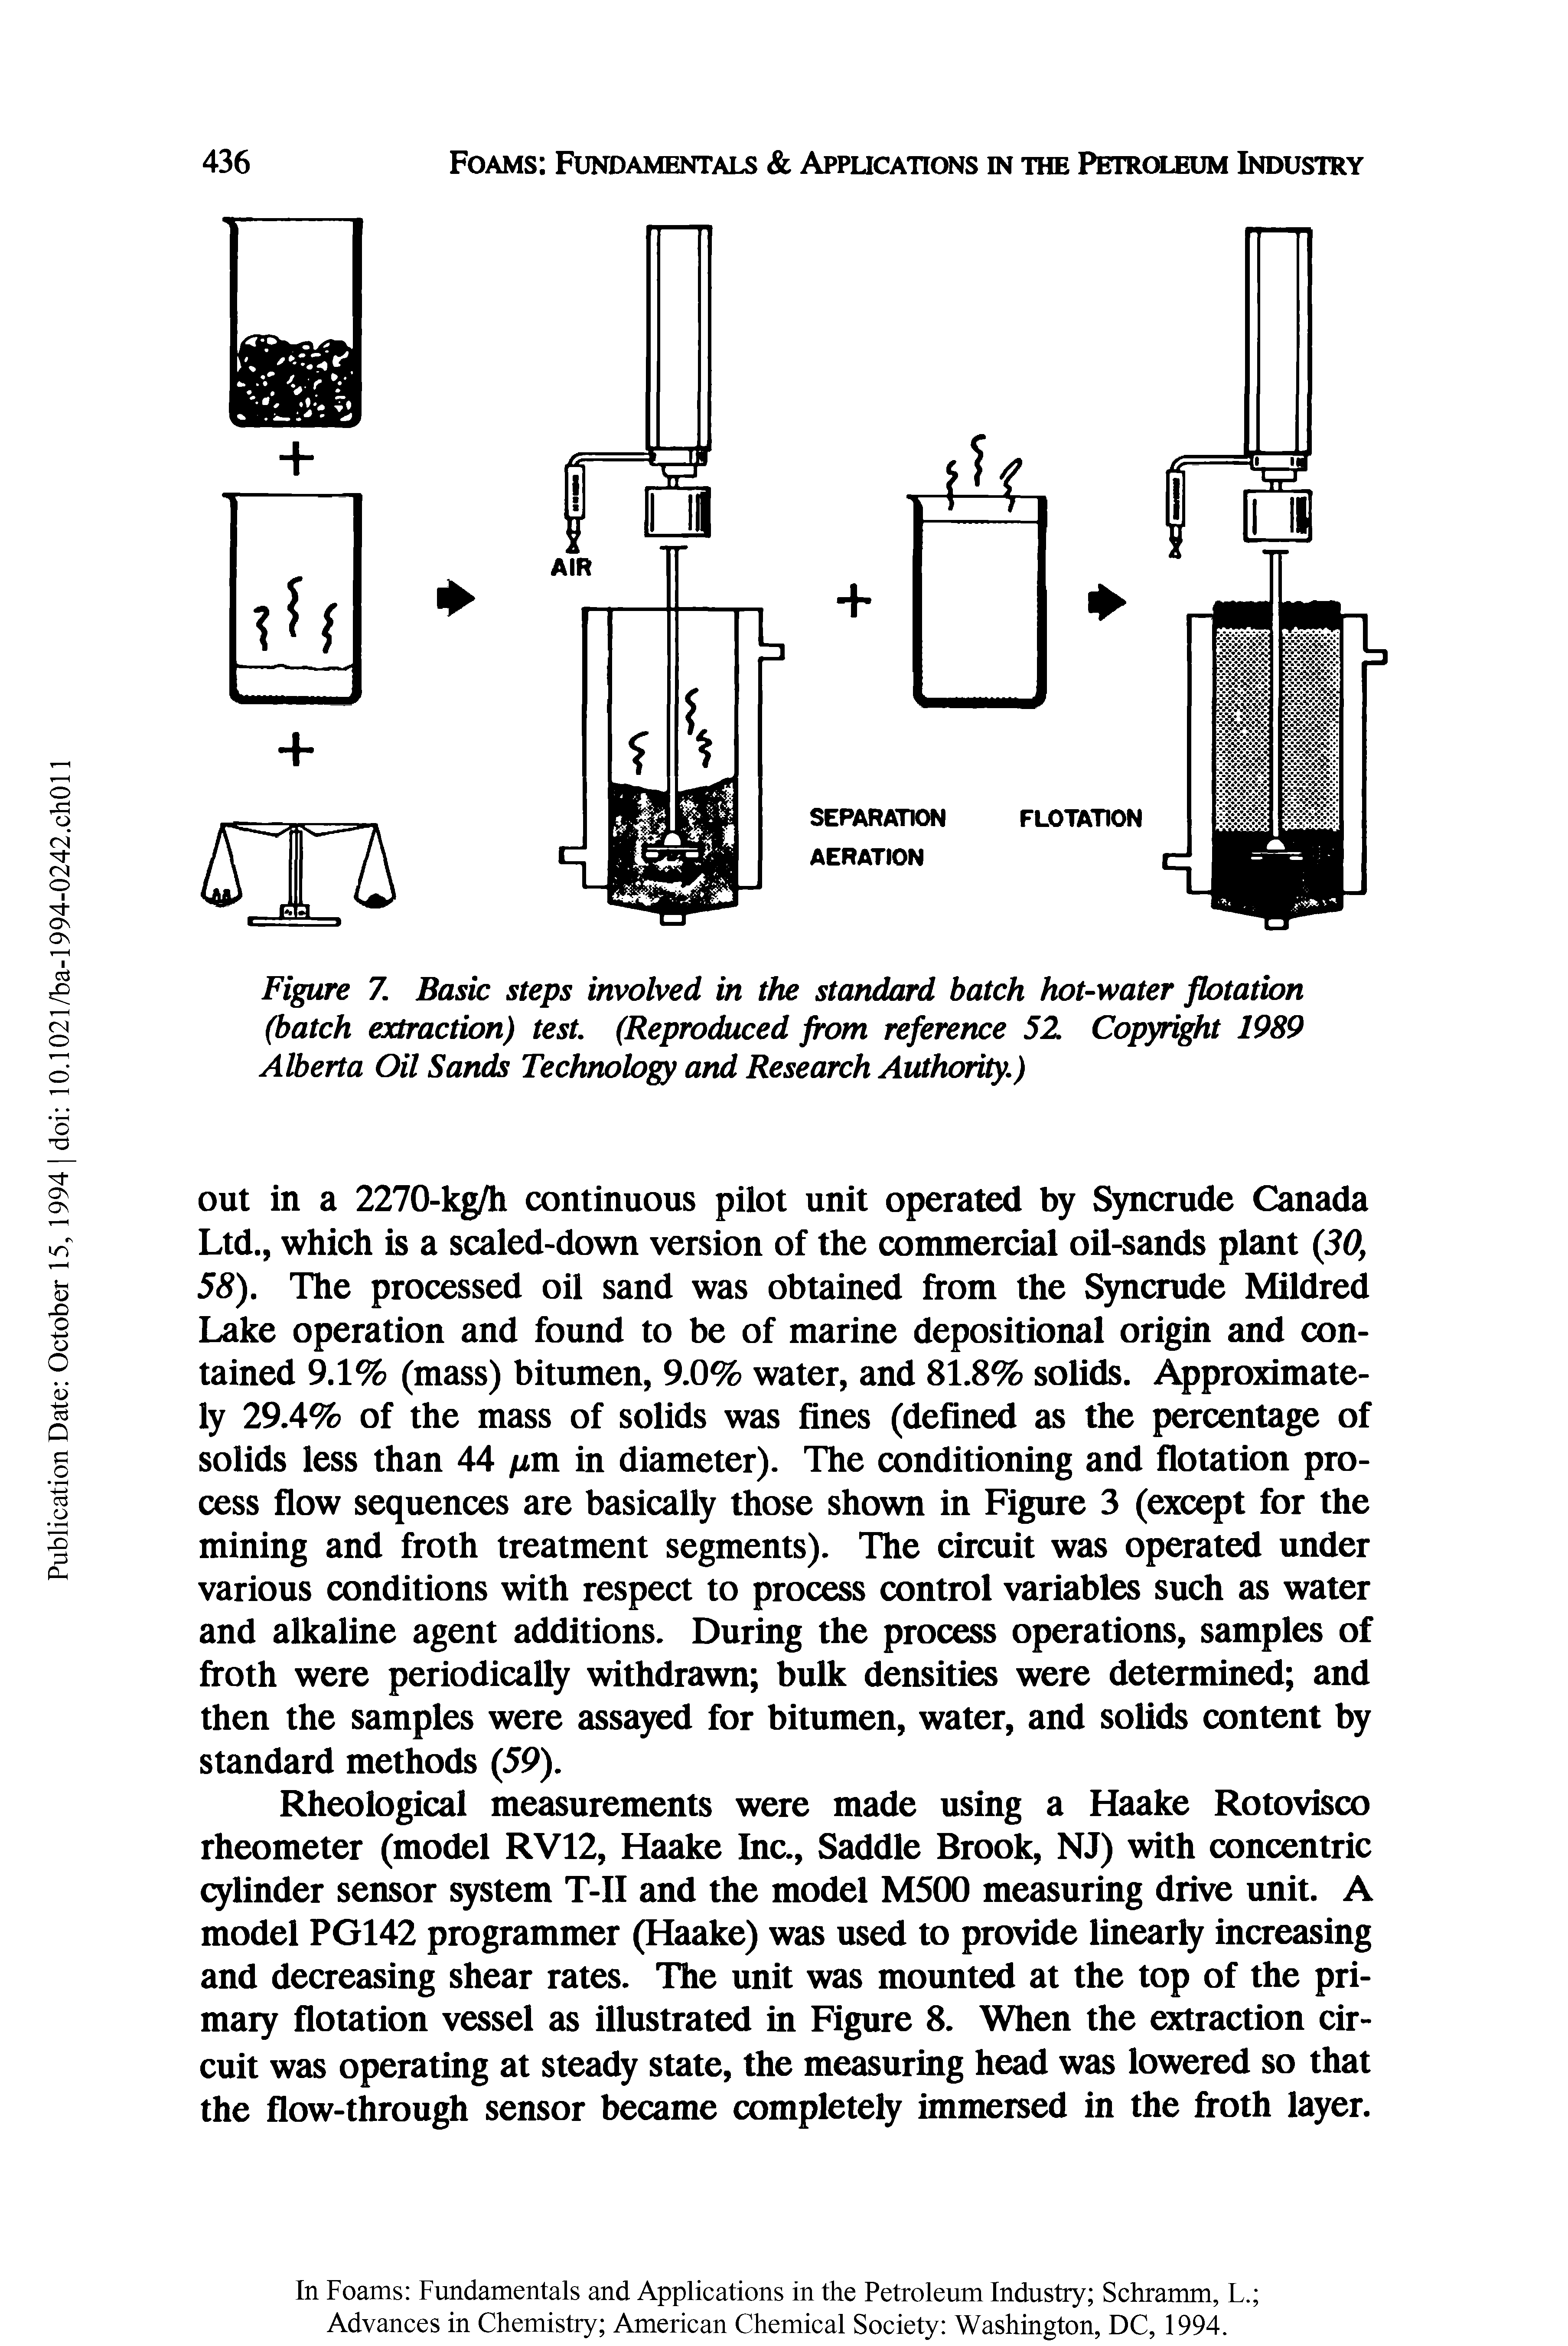 Figure 7. Basic steps involved in the standard batch hot-water flotation (batch extraction) test. (Reproduced from reference 52. Copyright 1989 Alberta Oil Sands Technology and Research Authority.)...